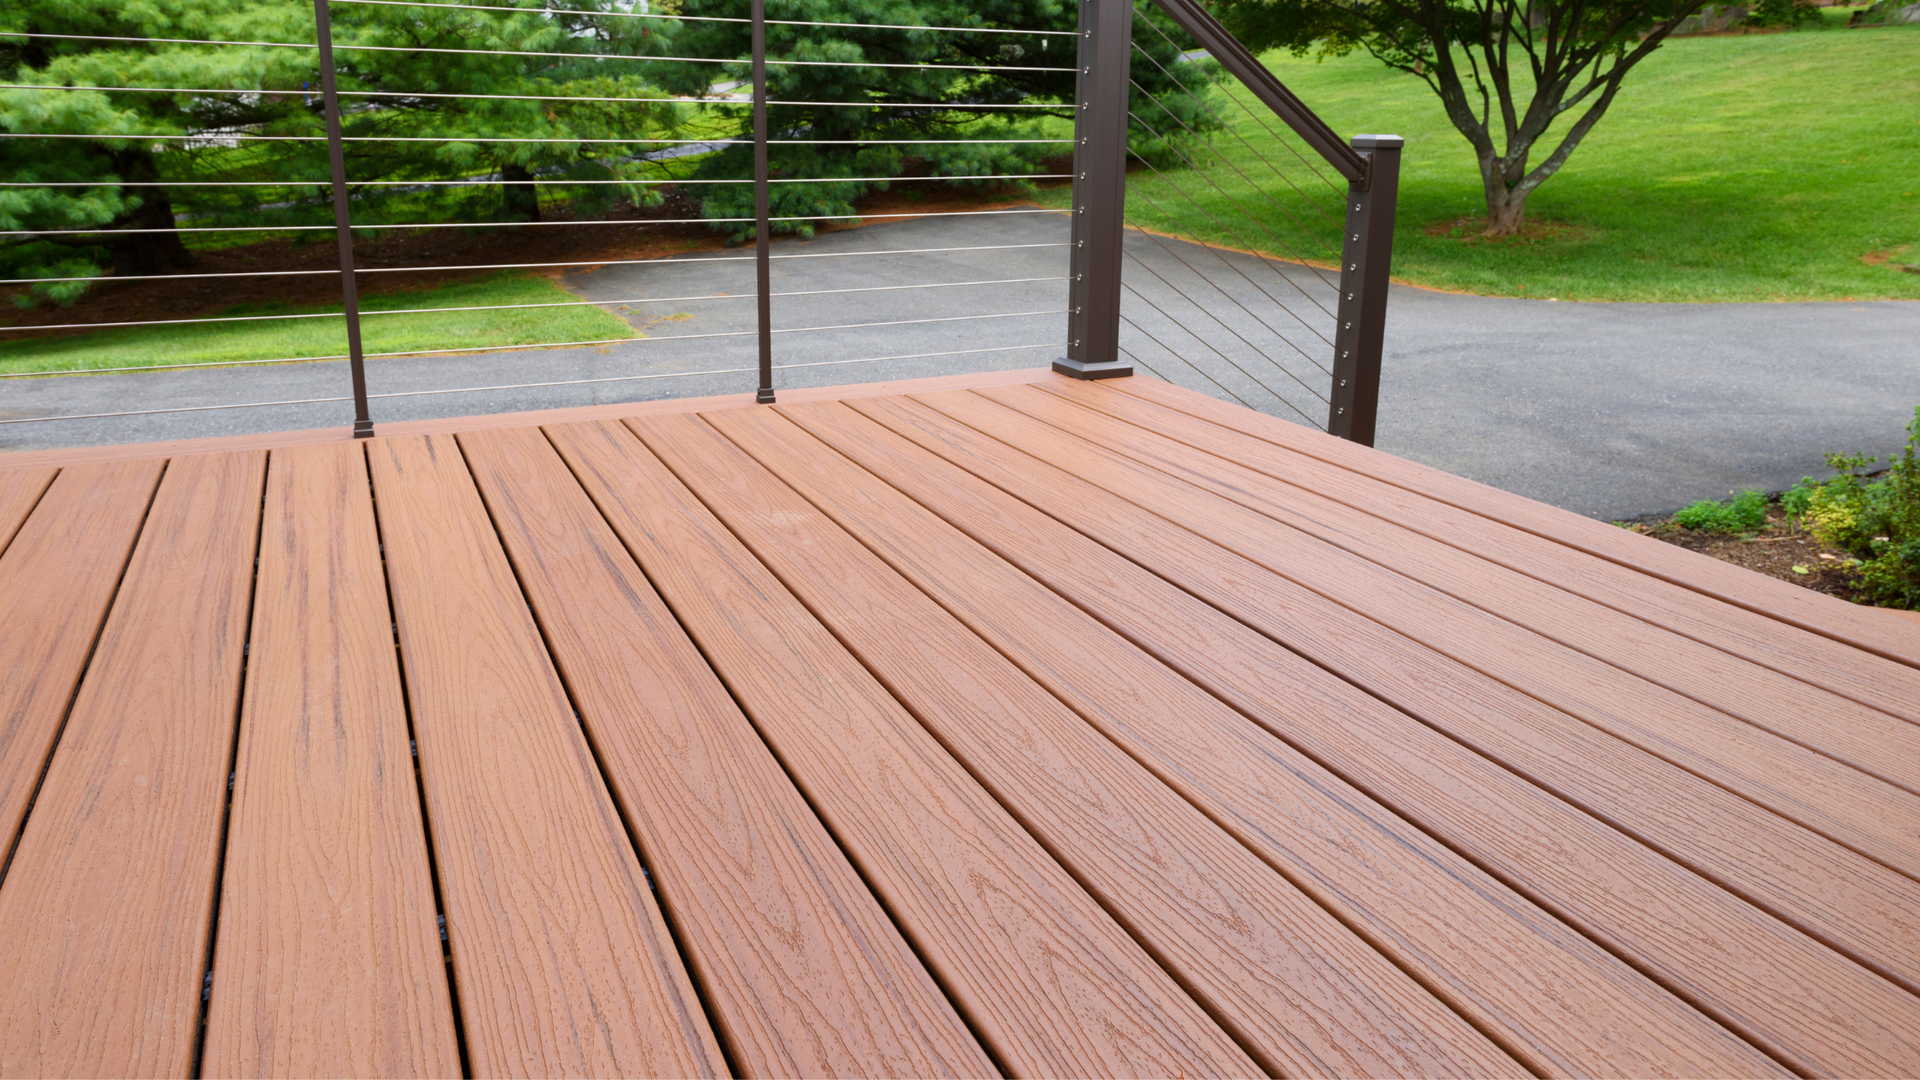 Composite deck with a beautiful wood design, surrounded by lush green trees.